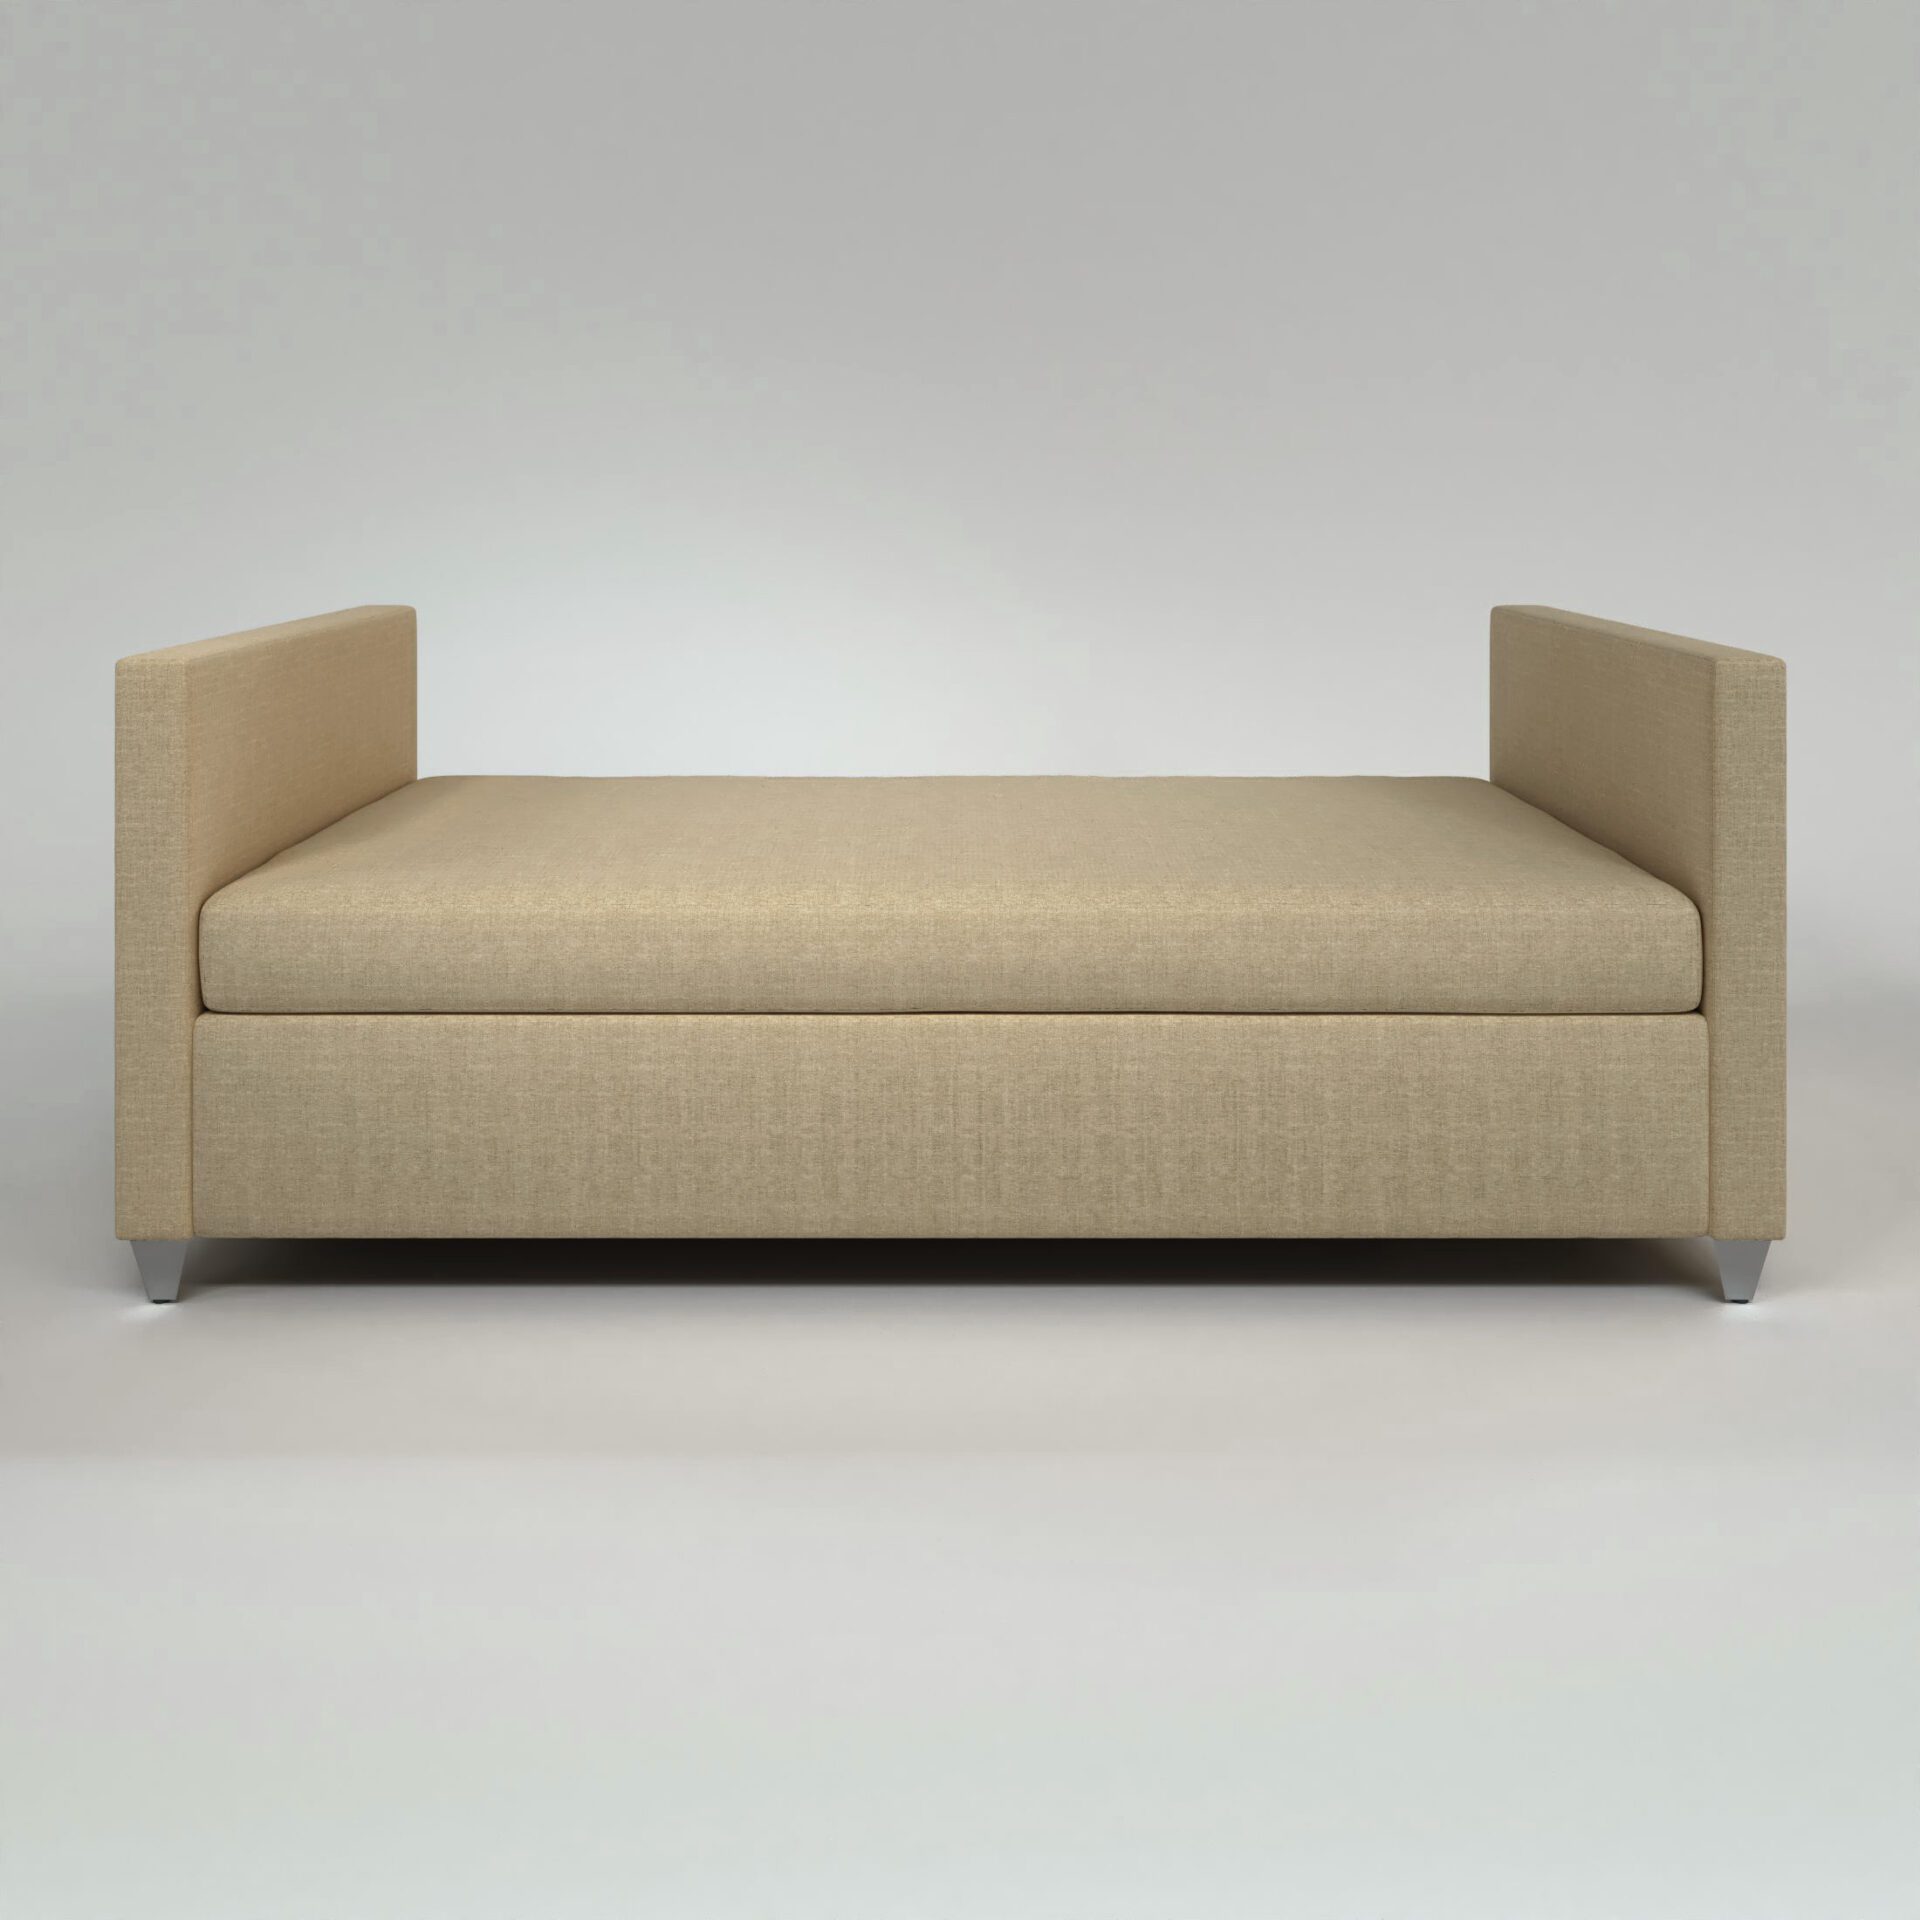 ATELIER-daybed-blend-home-furnishings.jpg